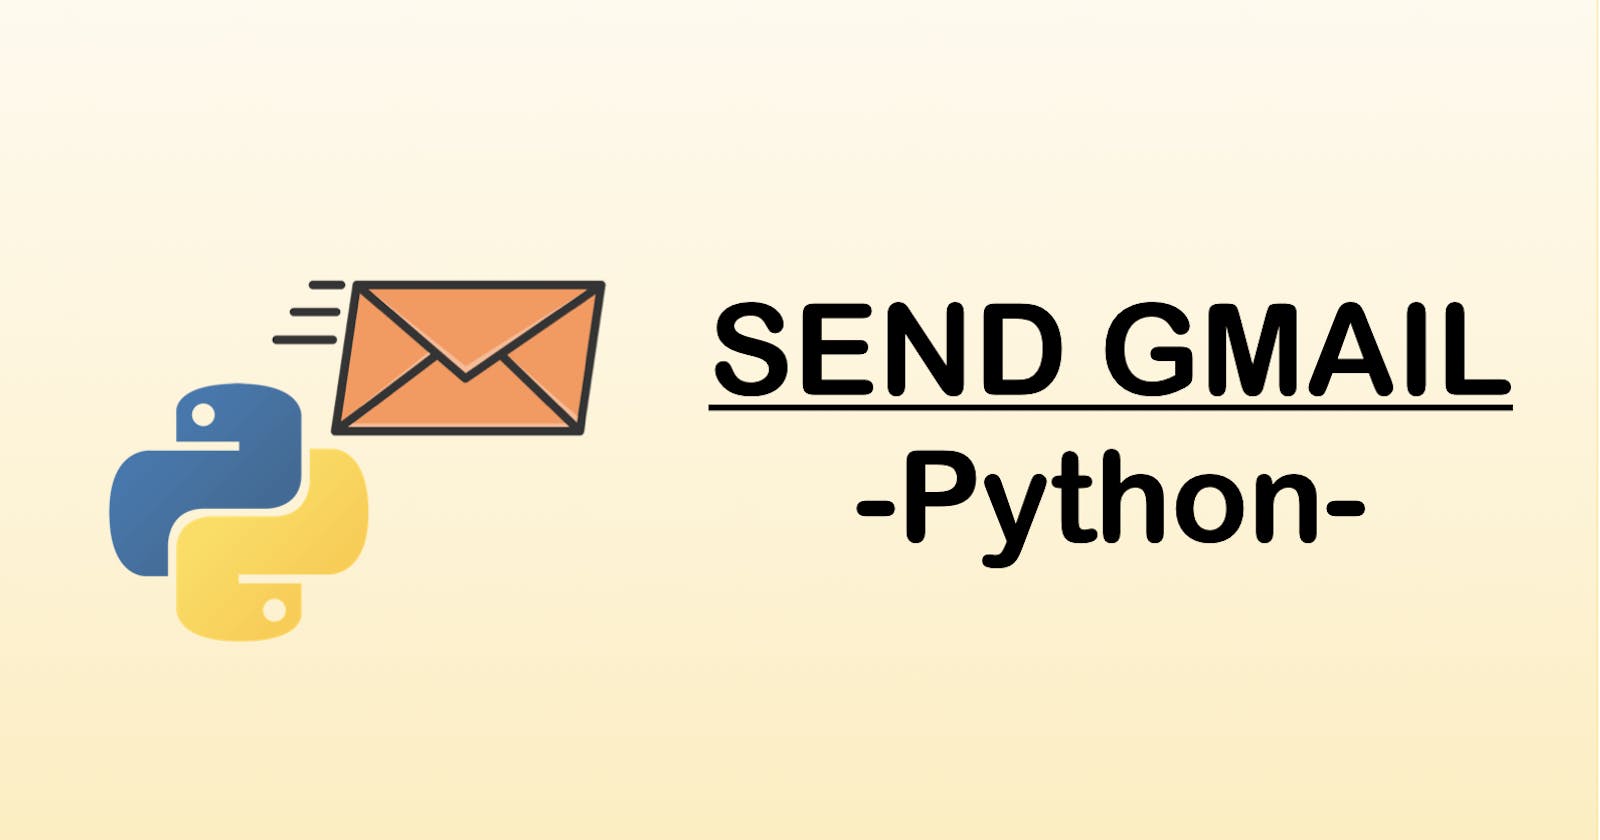 How to Send Gmail using Python?